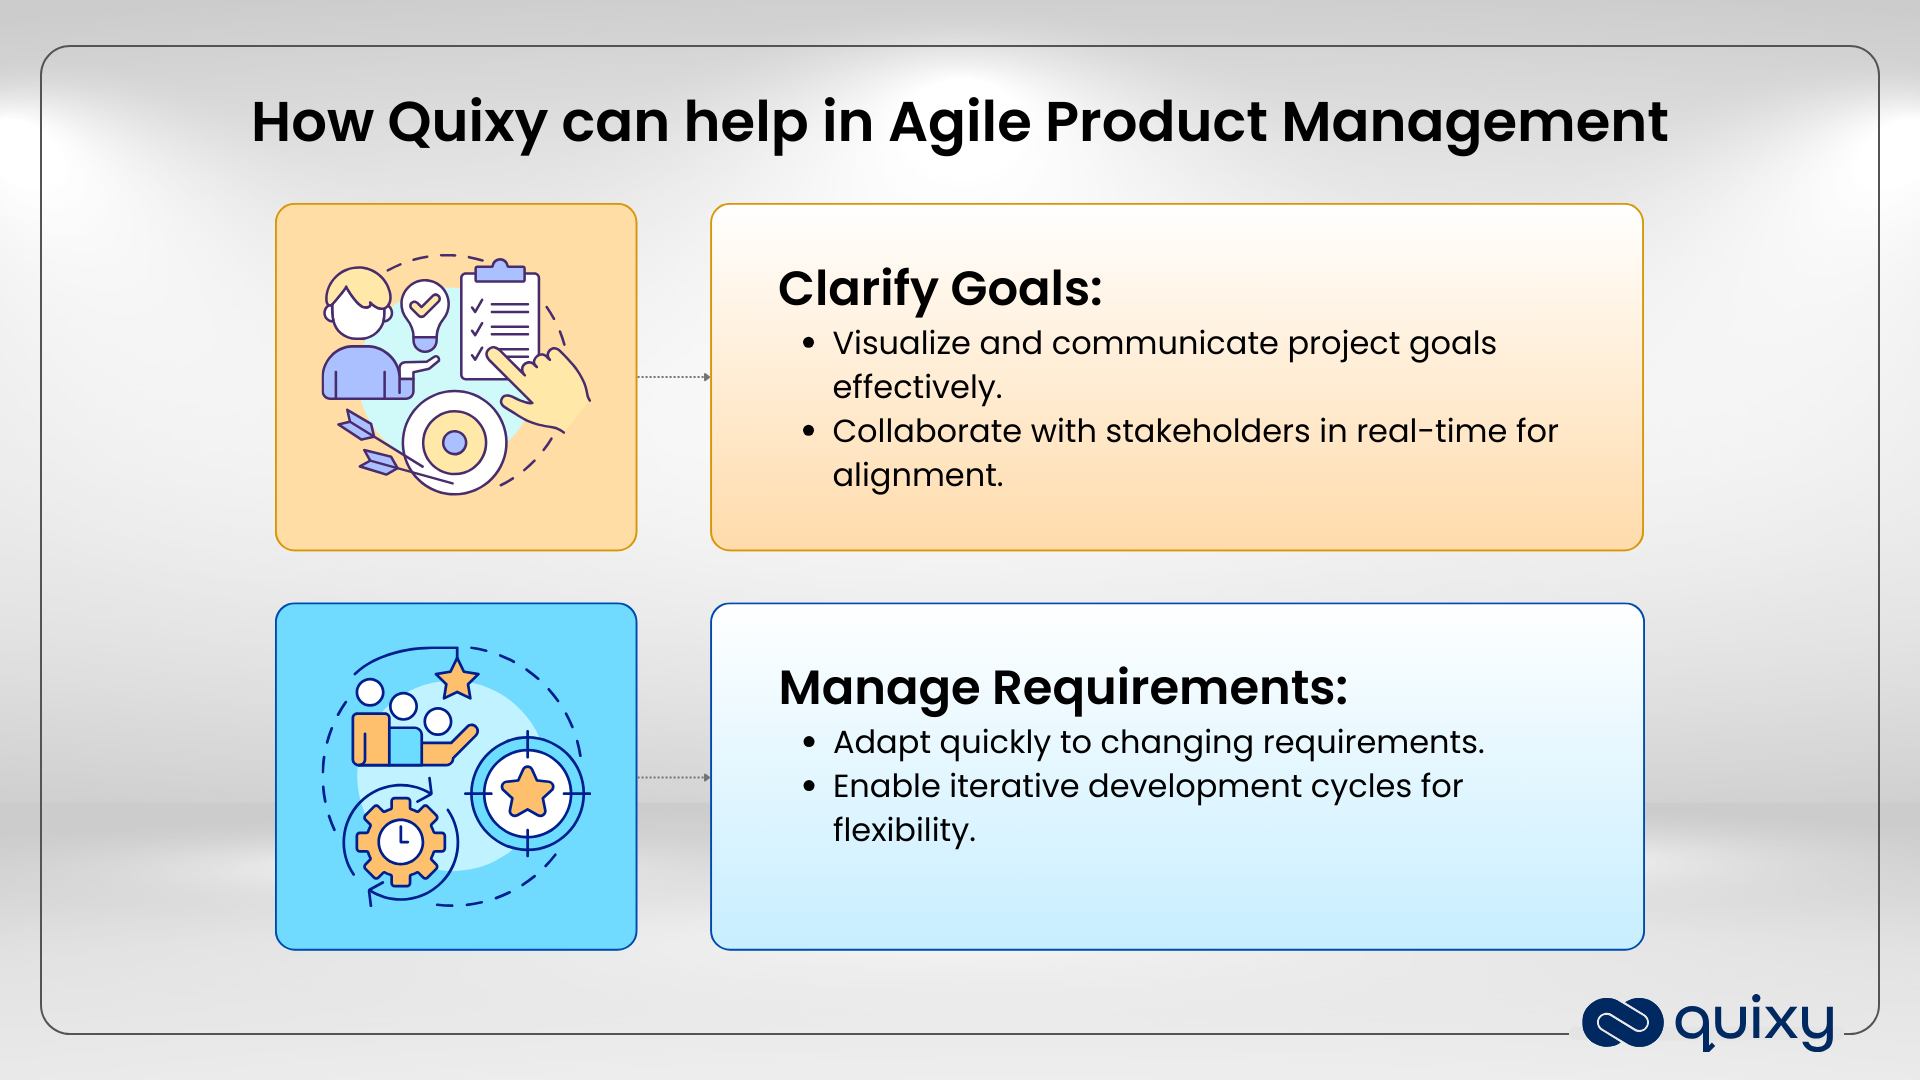 How Quixy can help in Agile Product Management